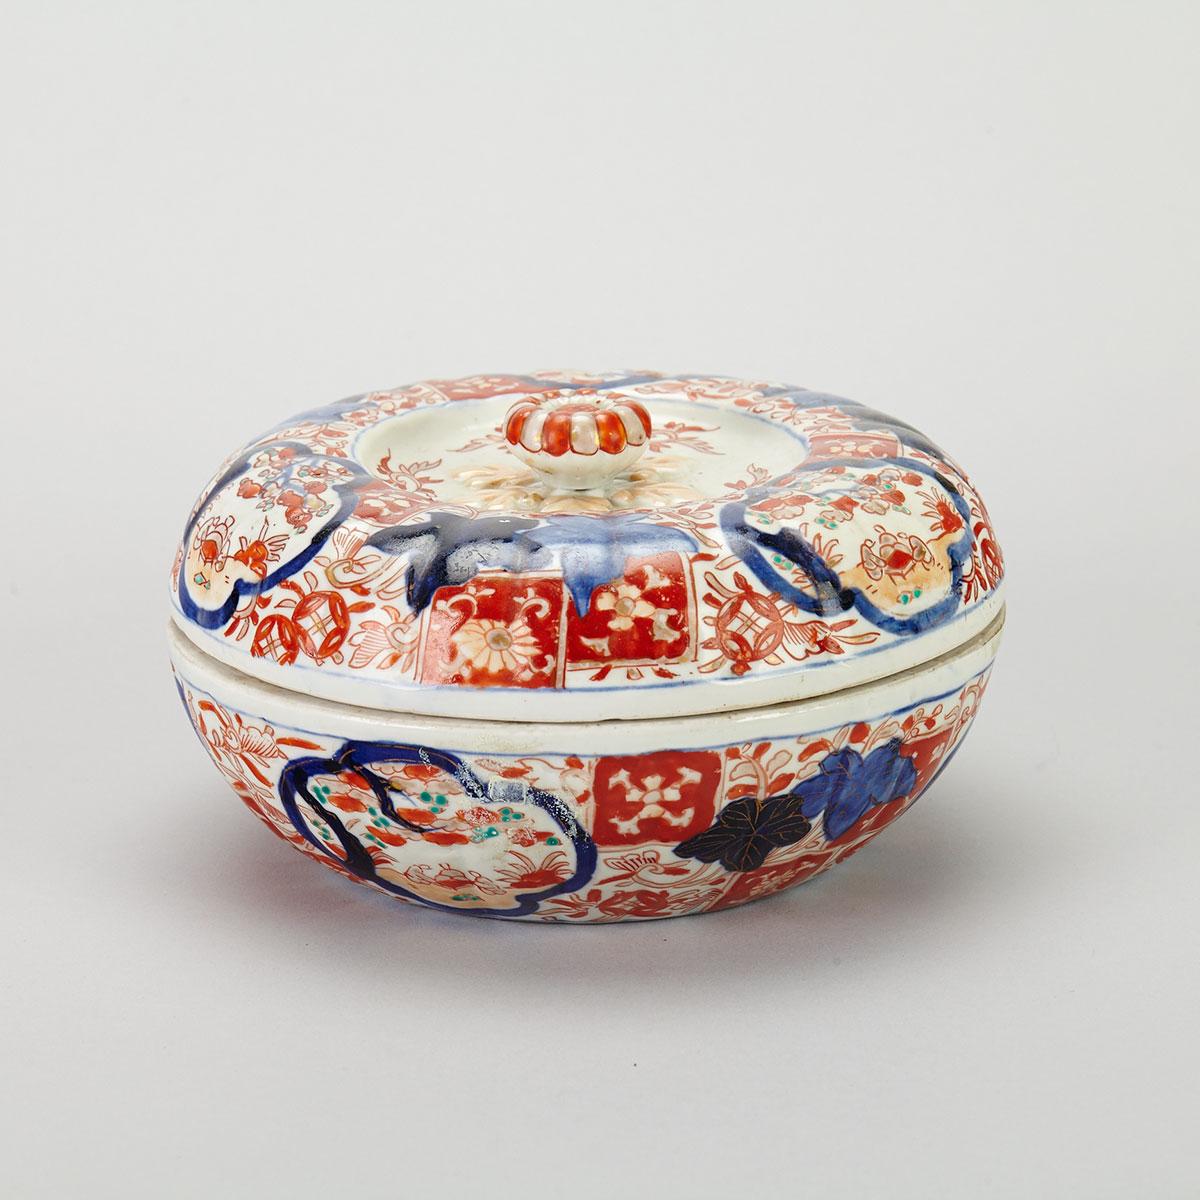 Imari Gourd Shaped Container and Cover, Meiji Period, Mid-19th Century